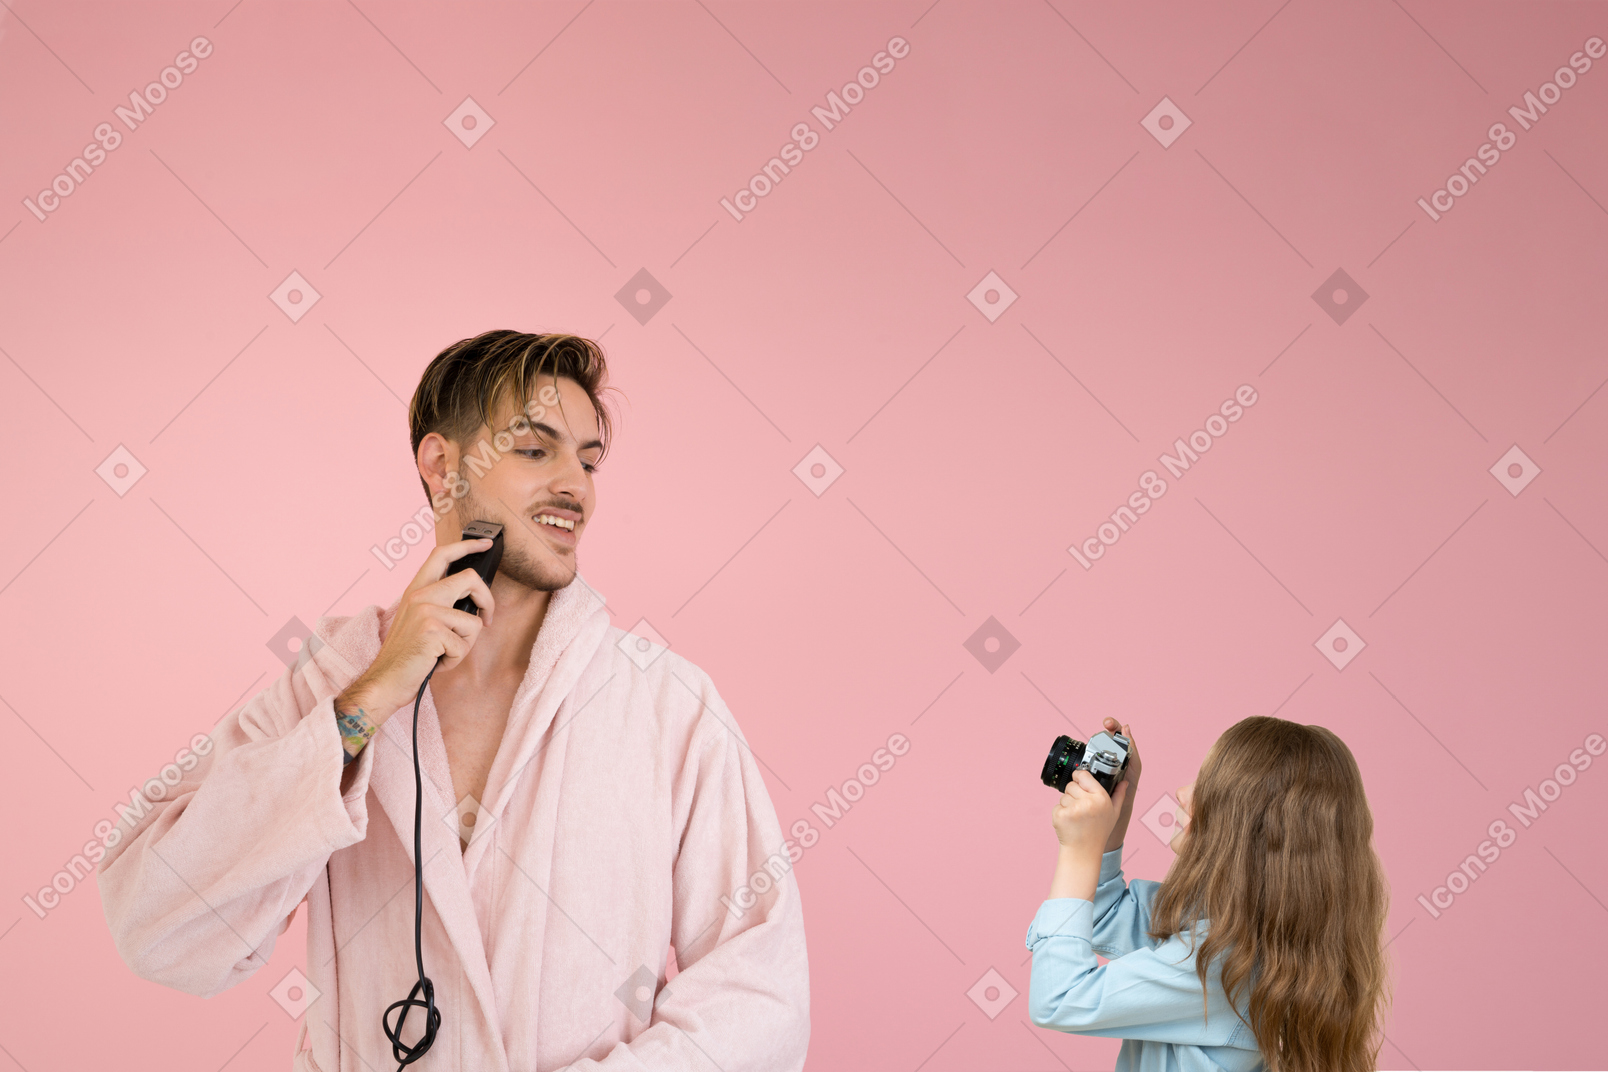 Just one more photo, daddy